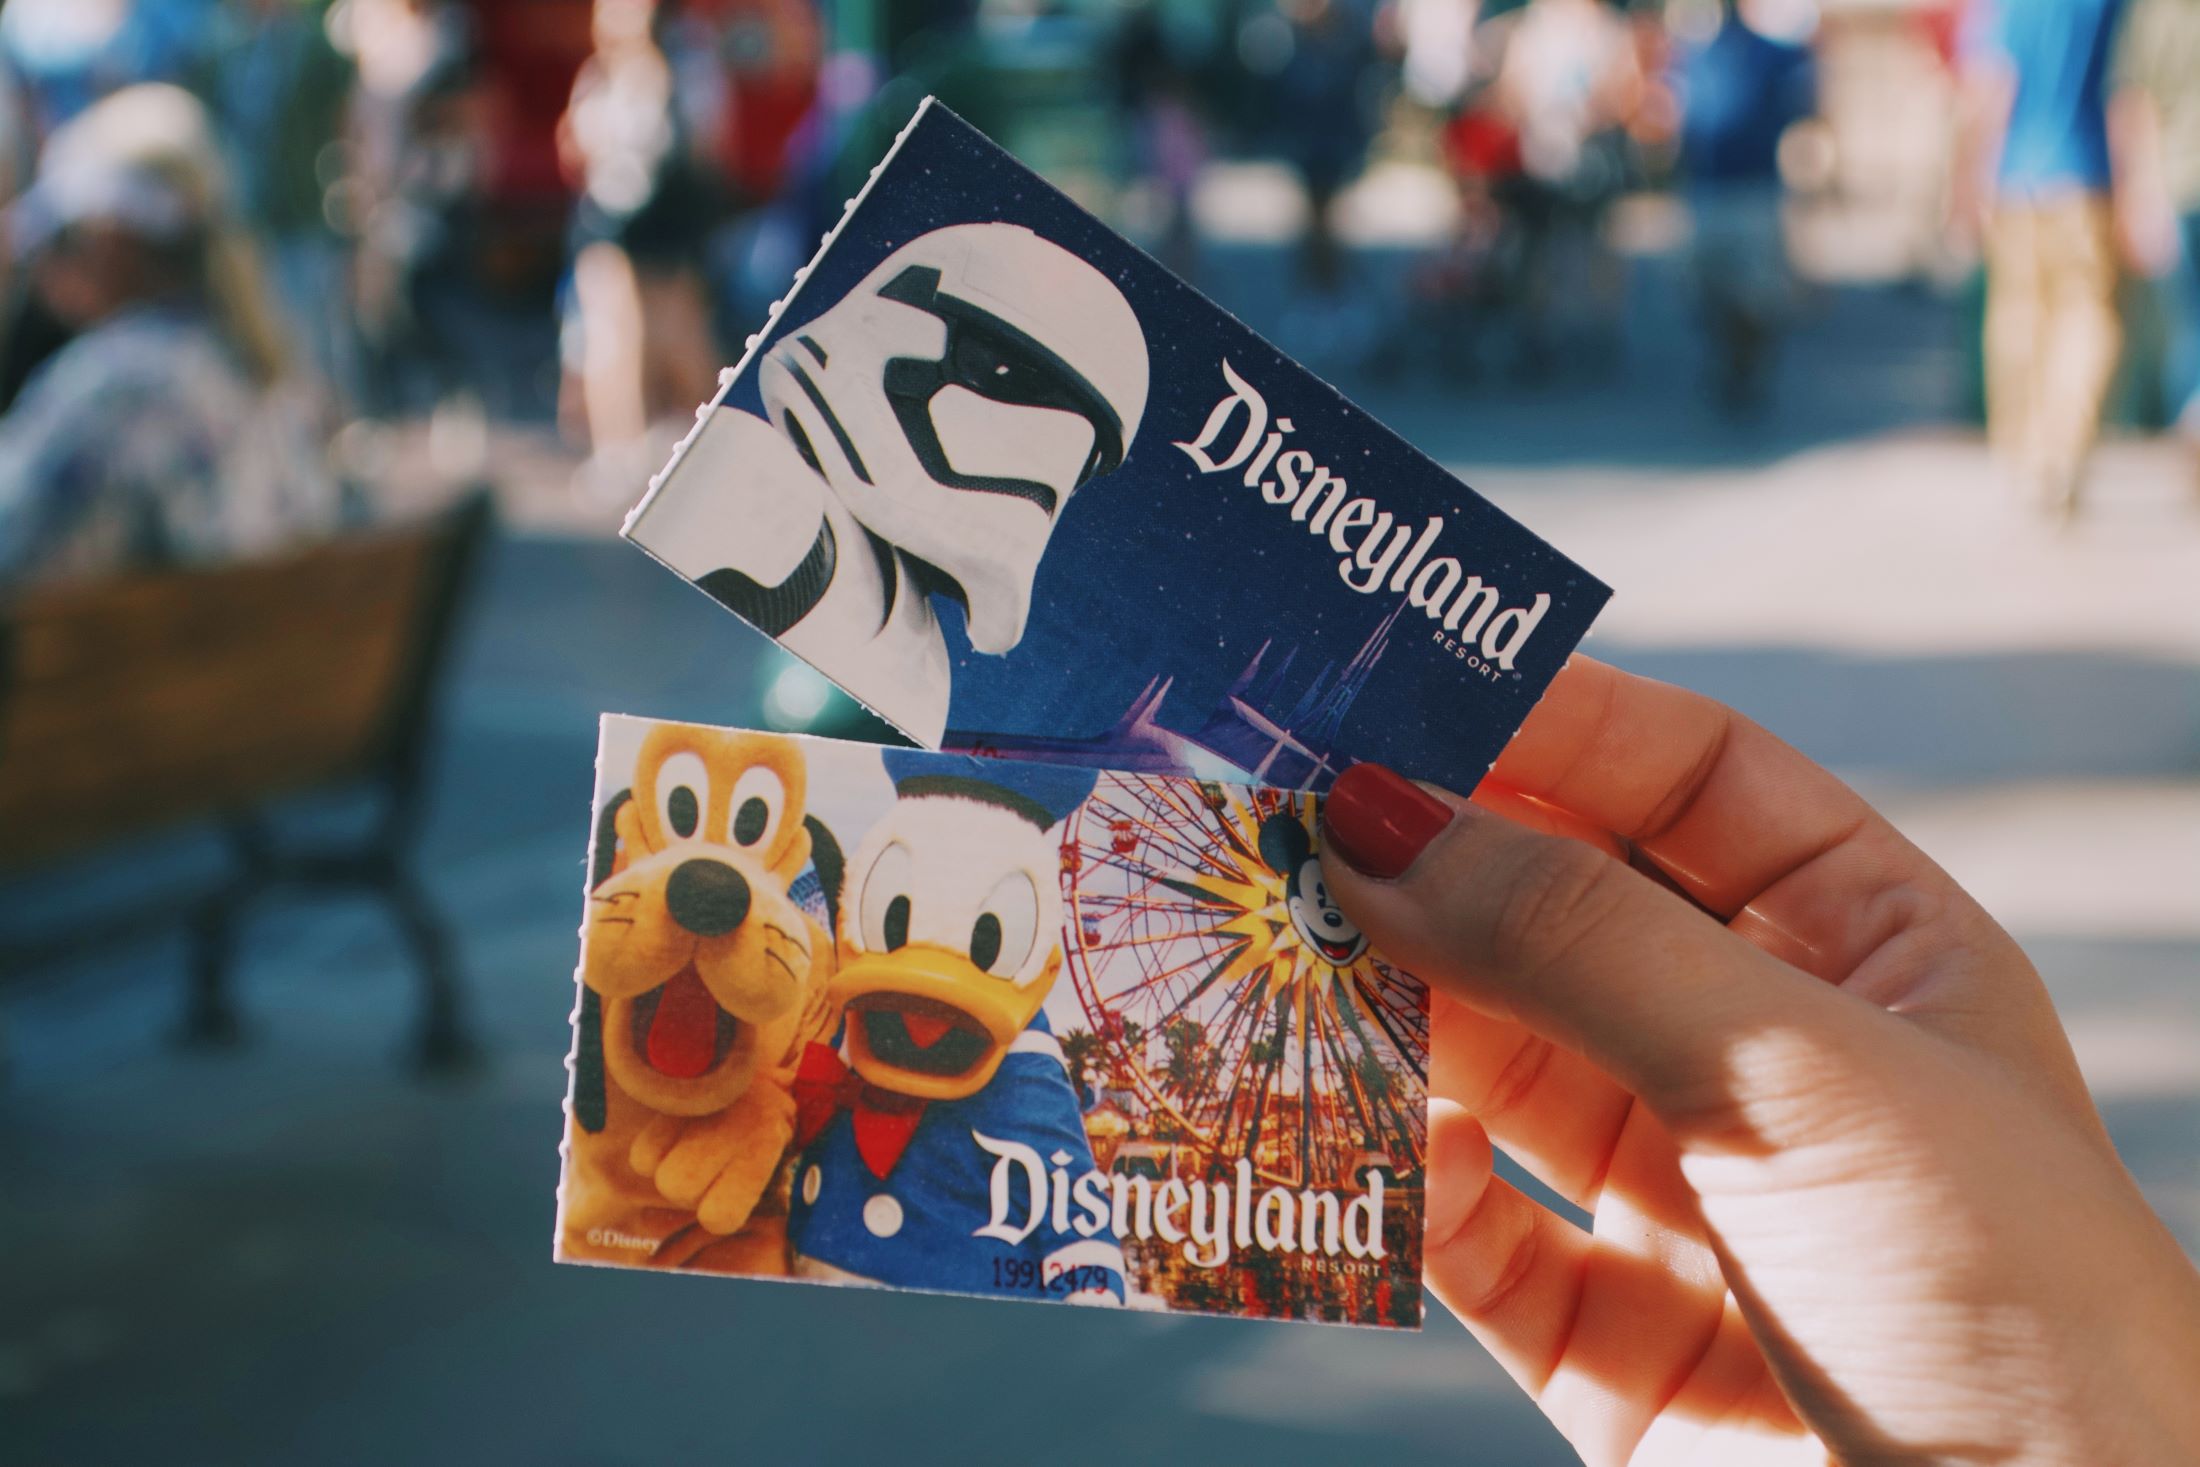 An image of someone holding Disneyland tickets.